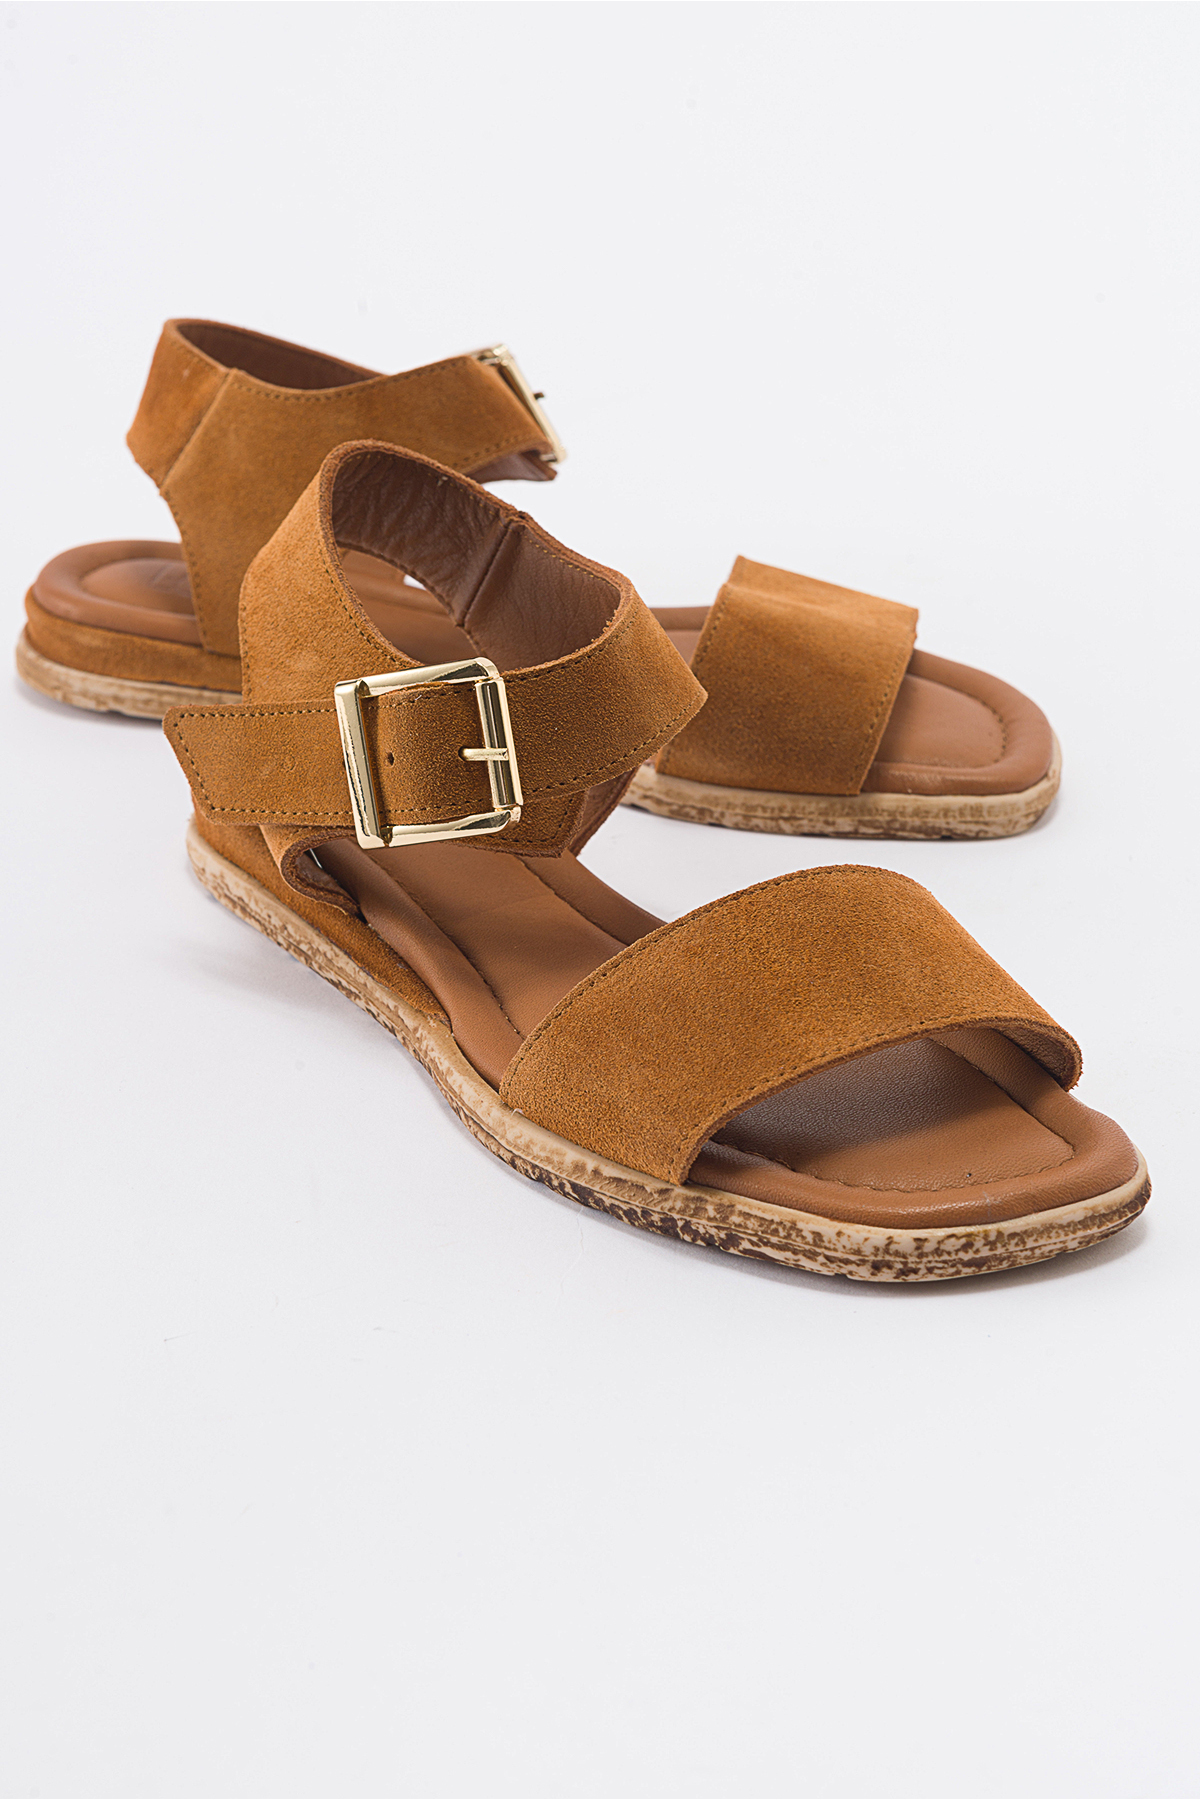 Levně LuviShoes 713 Women's Genuine Leather Tan Suede Sandals